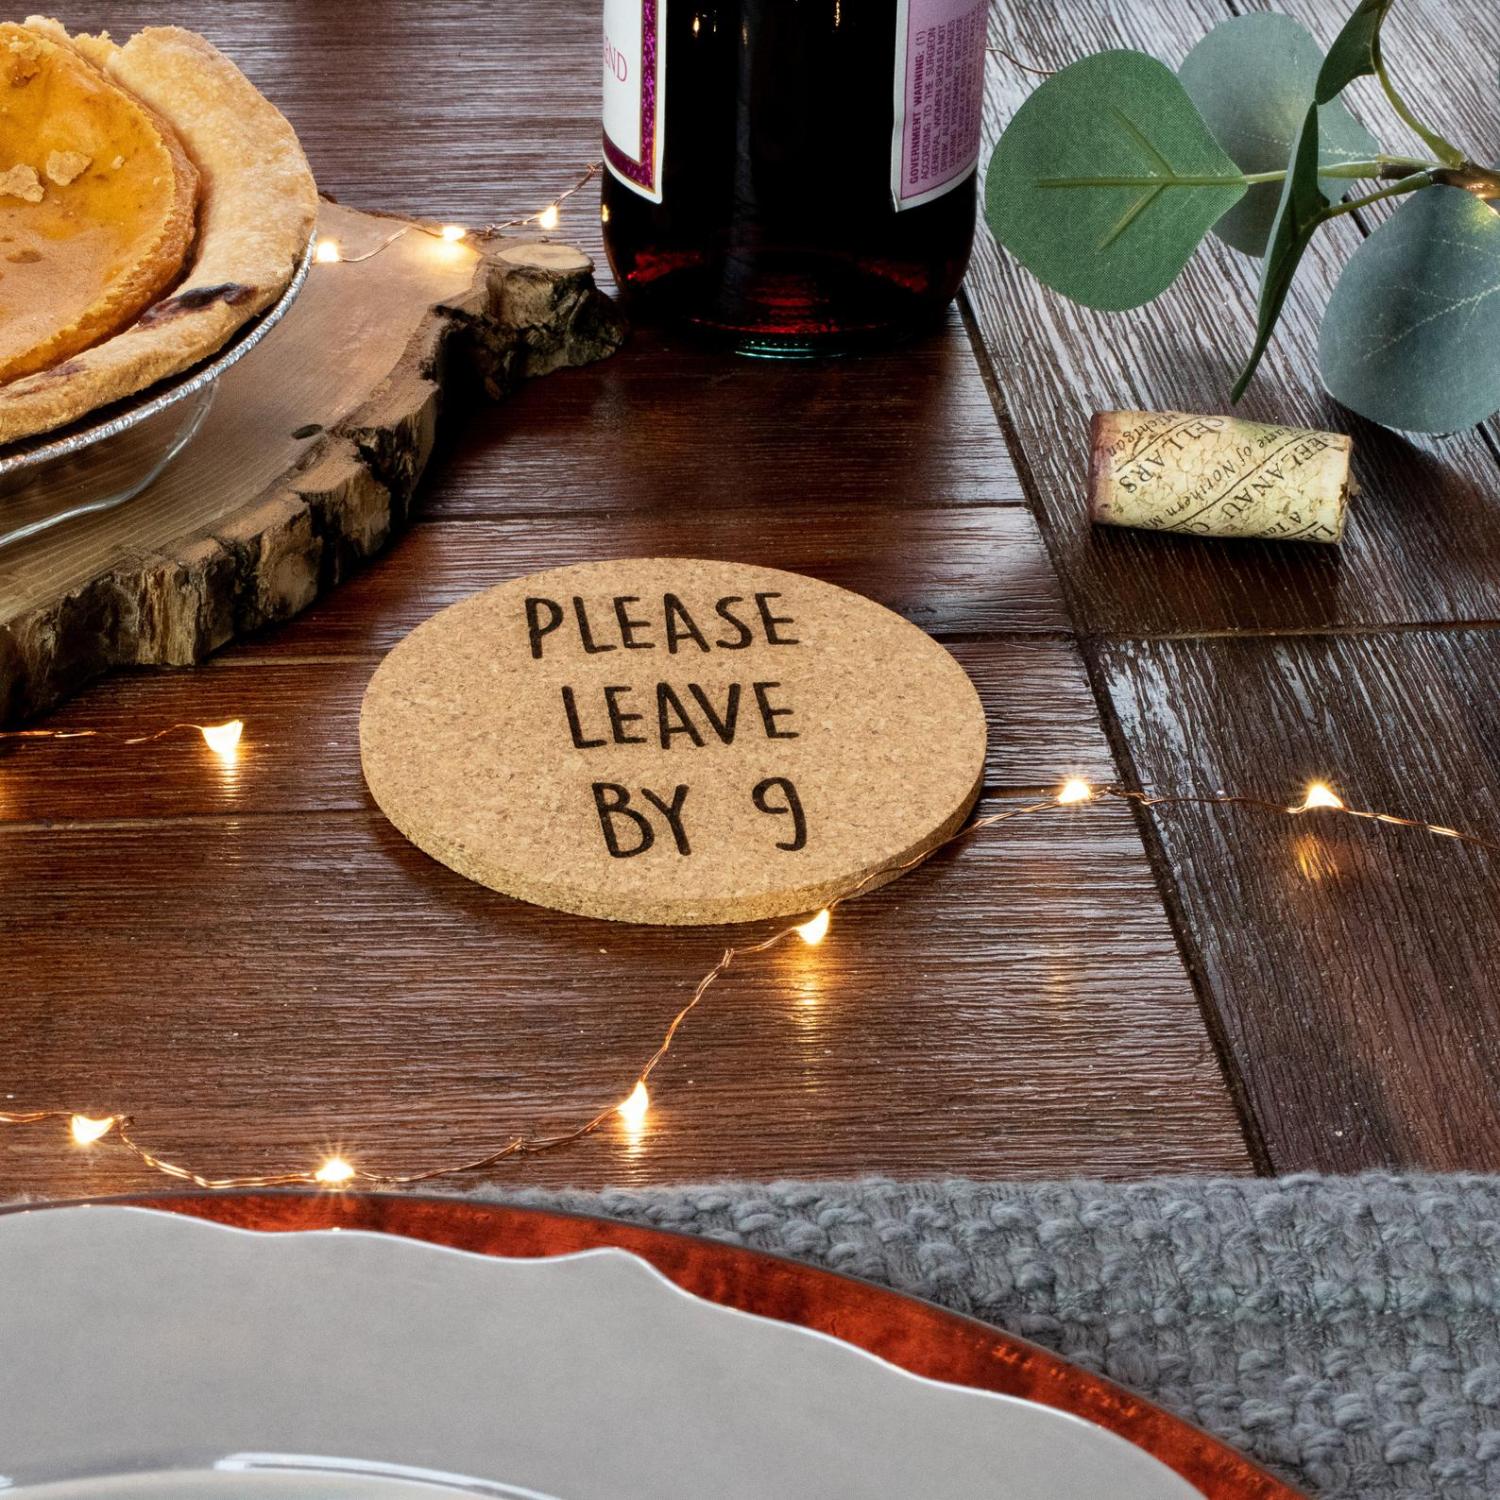 A round please leave by 9 coasters on a wooden table along with half pumpkin pie in a pie pan and a wine bottle on the table